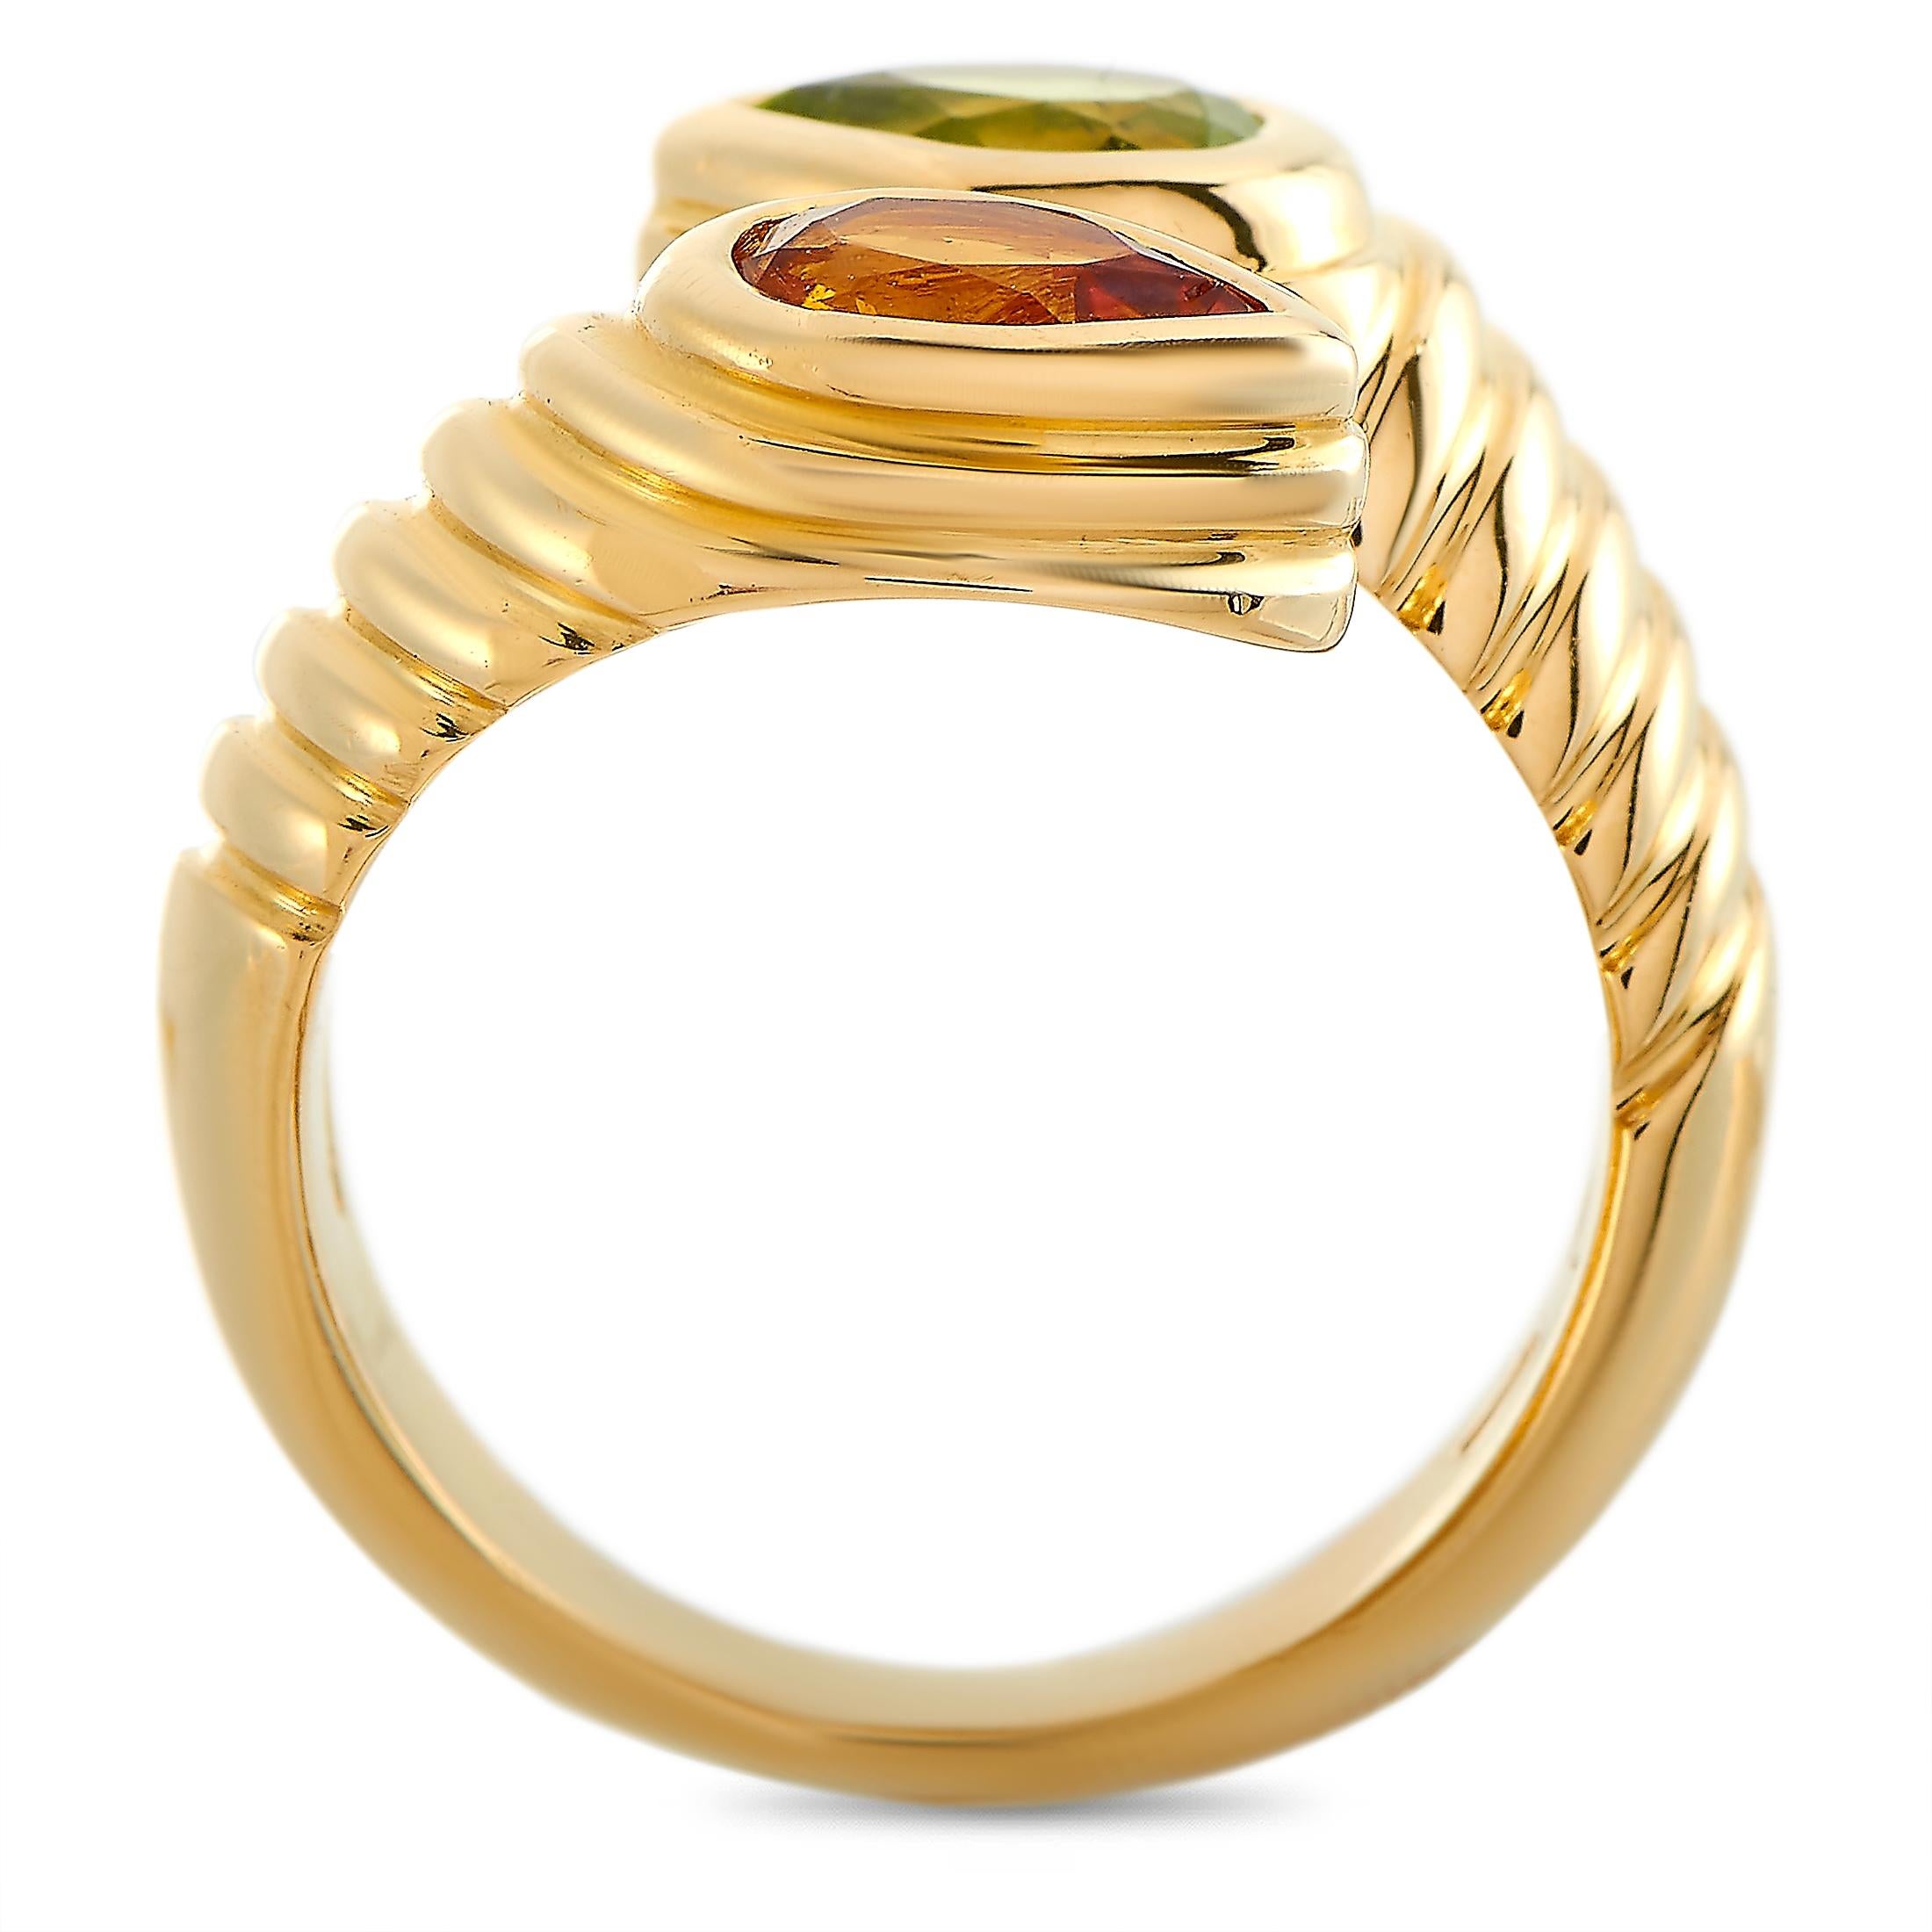 The Bvlgari “Doppio” ring is made of 18K yellow gold and embellished with a citrine and a peridot. The ring weighs 10.9 grams and boasts band thickness of 3 mm and top height of 3 mm, while top dimensions measure 15 by 10 mm.
 
 This jewelry piece